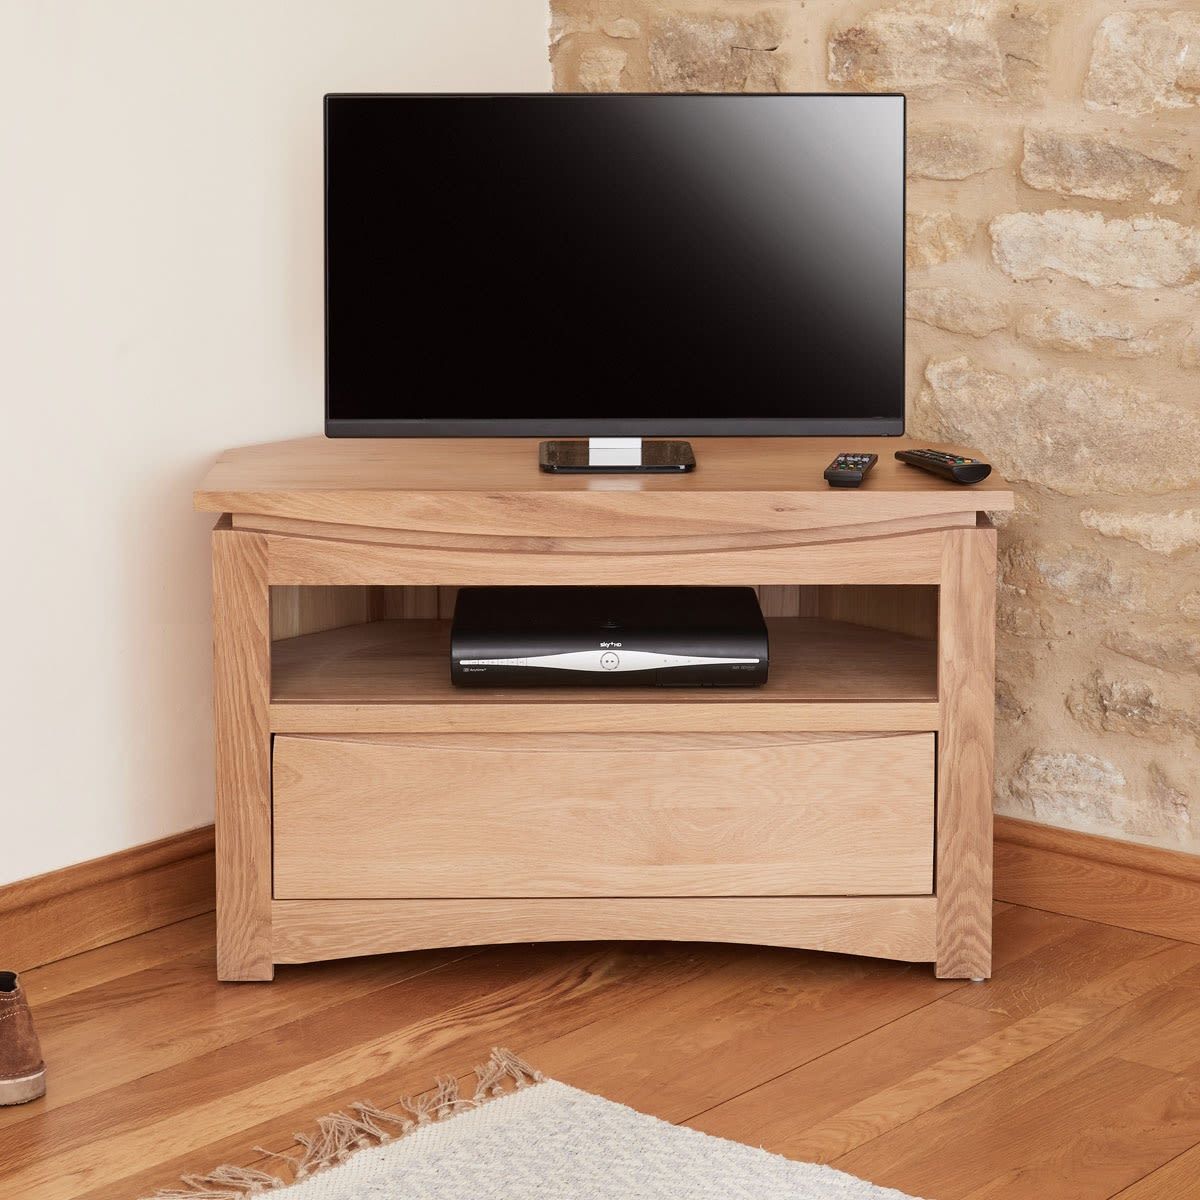 Roscoe Contemporary Oak Corner Television Cabinet Was £360 For Wooden Corner Tv Cabinets (View 2 of 15)